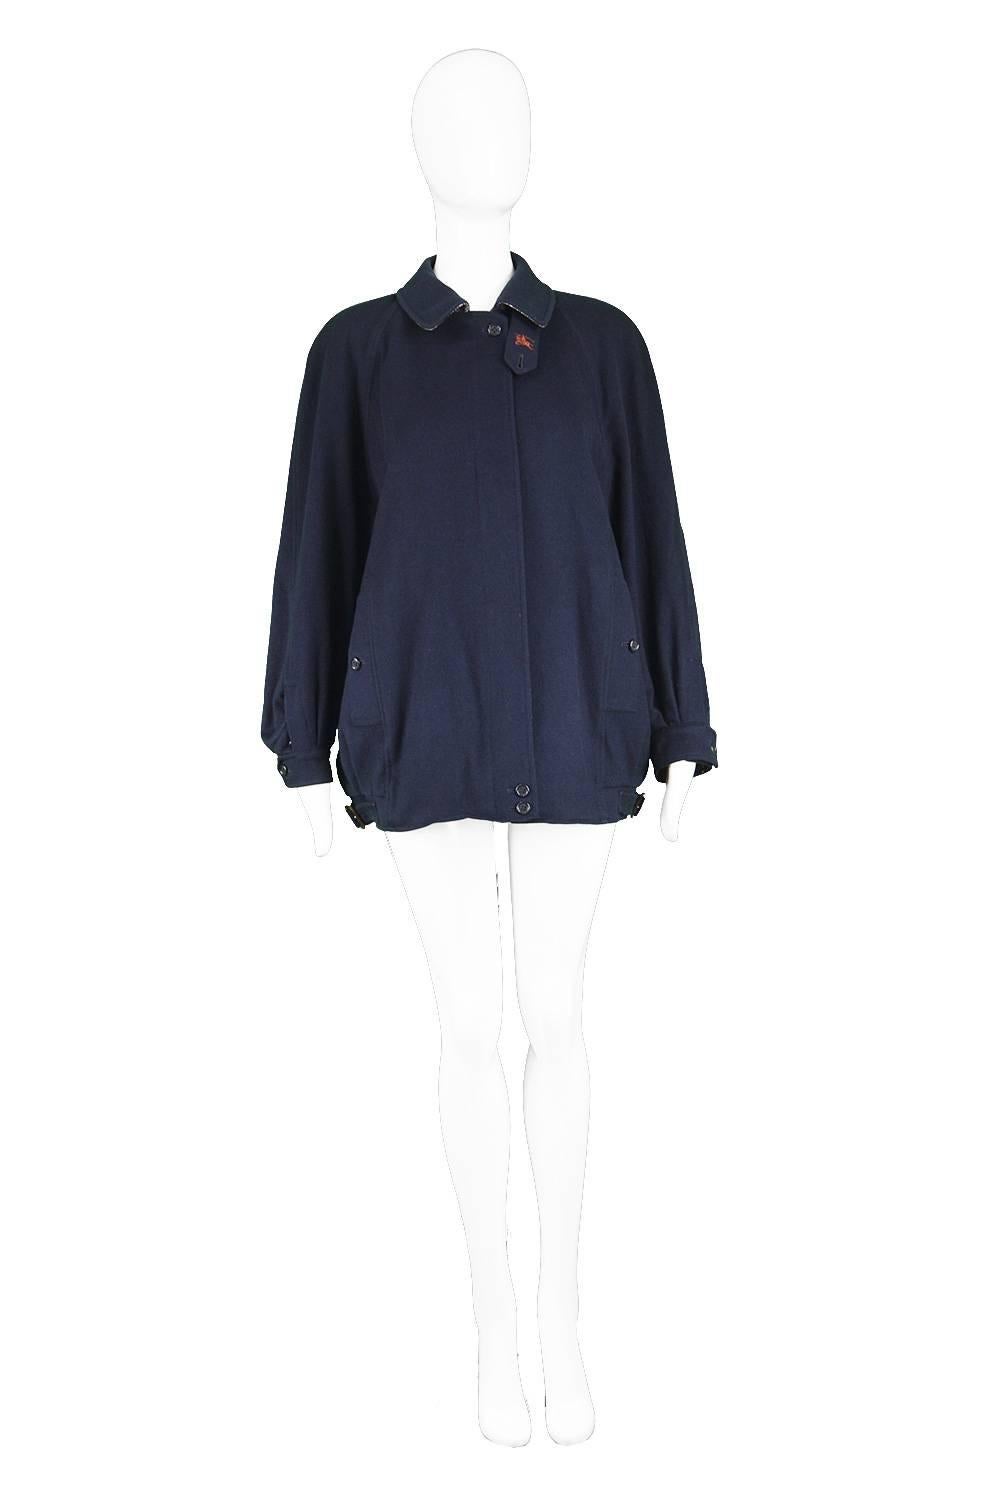 Burberry Vintage 1980s Navy Blue Alpaca & Wool Embroidered Women's Bomber Jacket

Estimated Size: Women's Medium to Large but this gives an intentionally oversized fit. Please check measurements. 
Bust - 48” / 122cm (meant to have a loose fit)
Waist